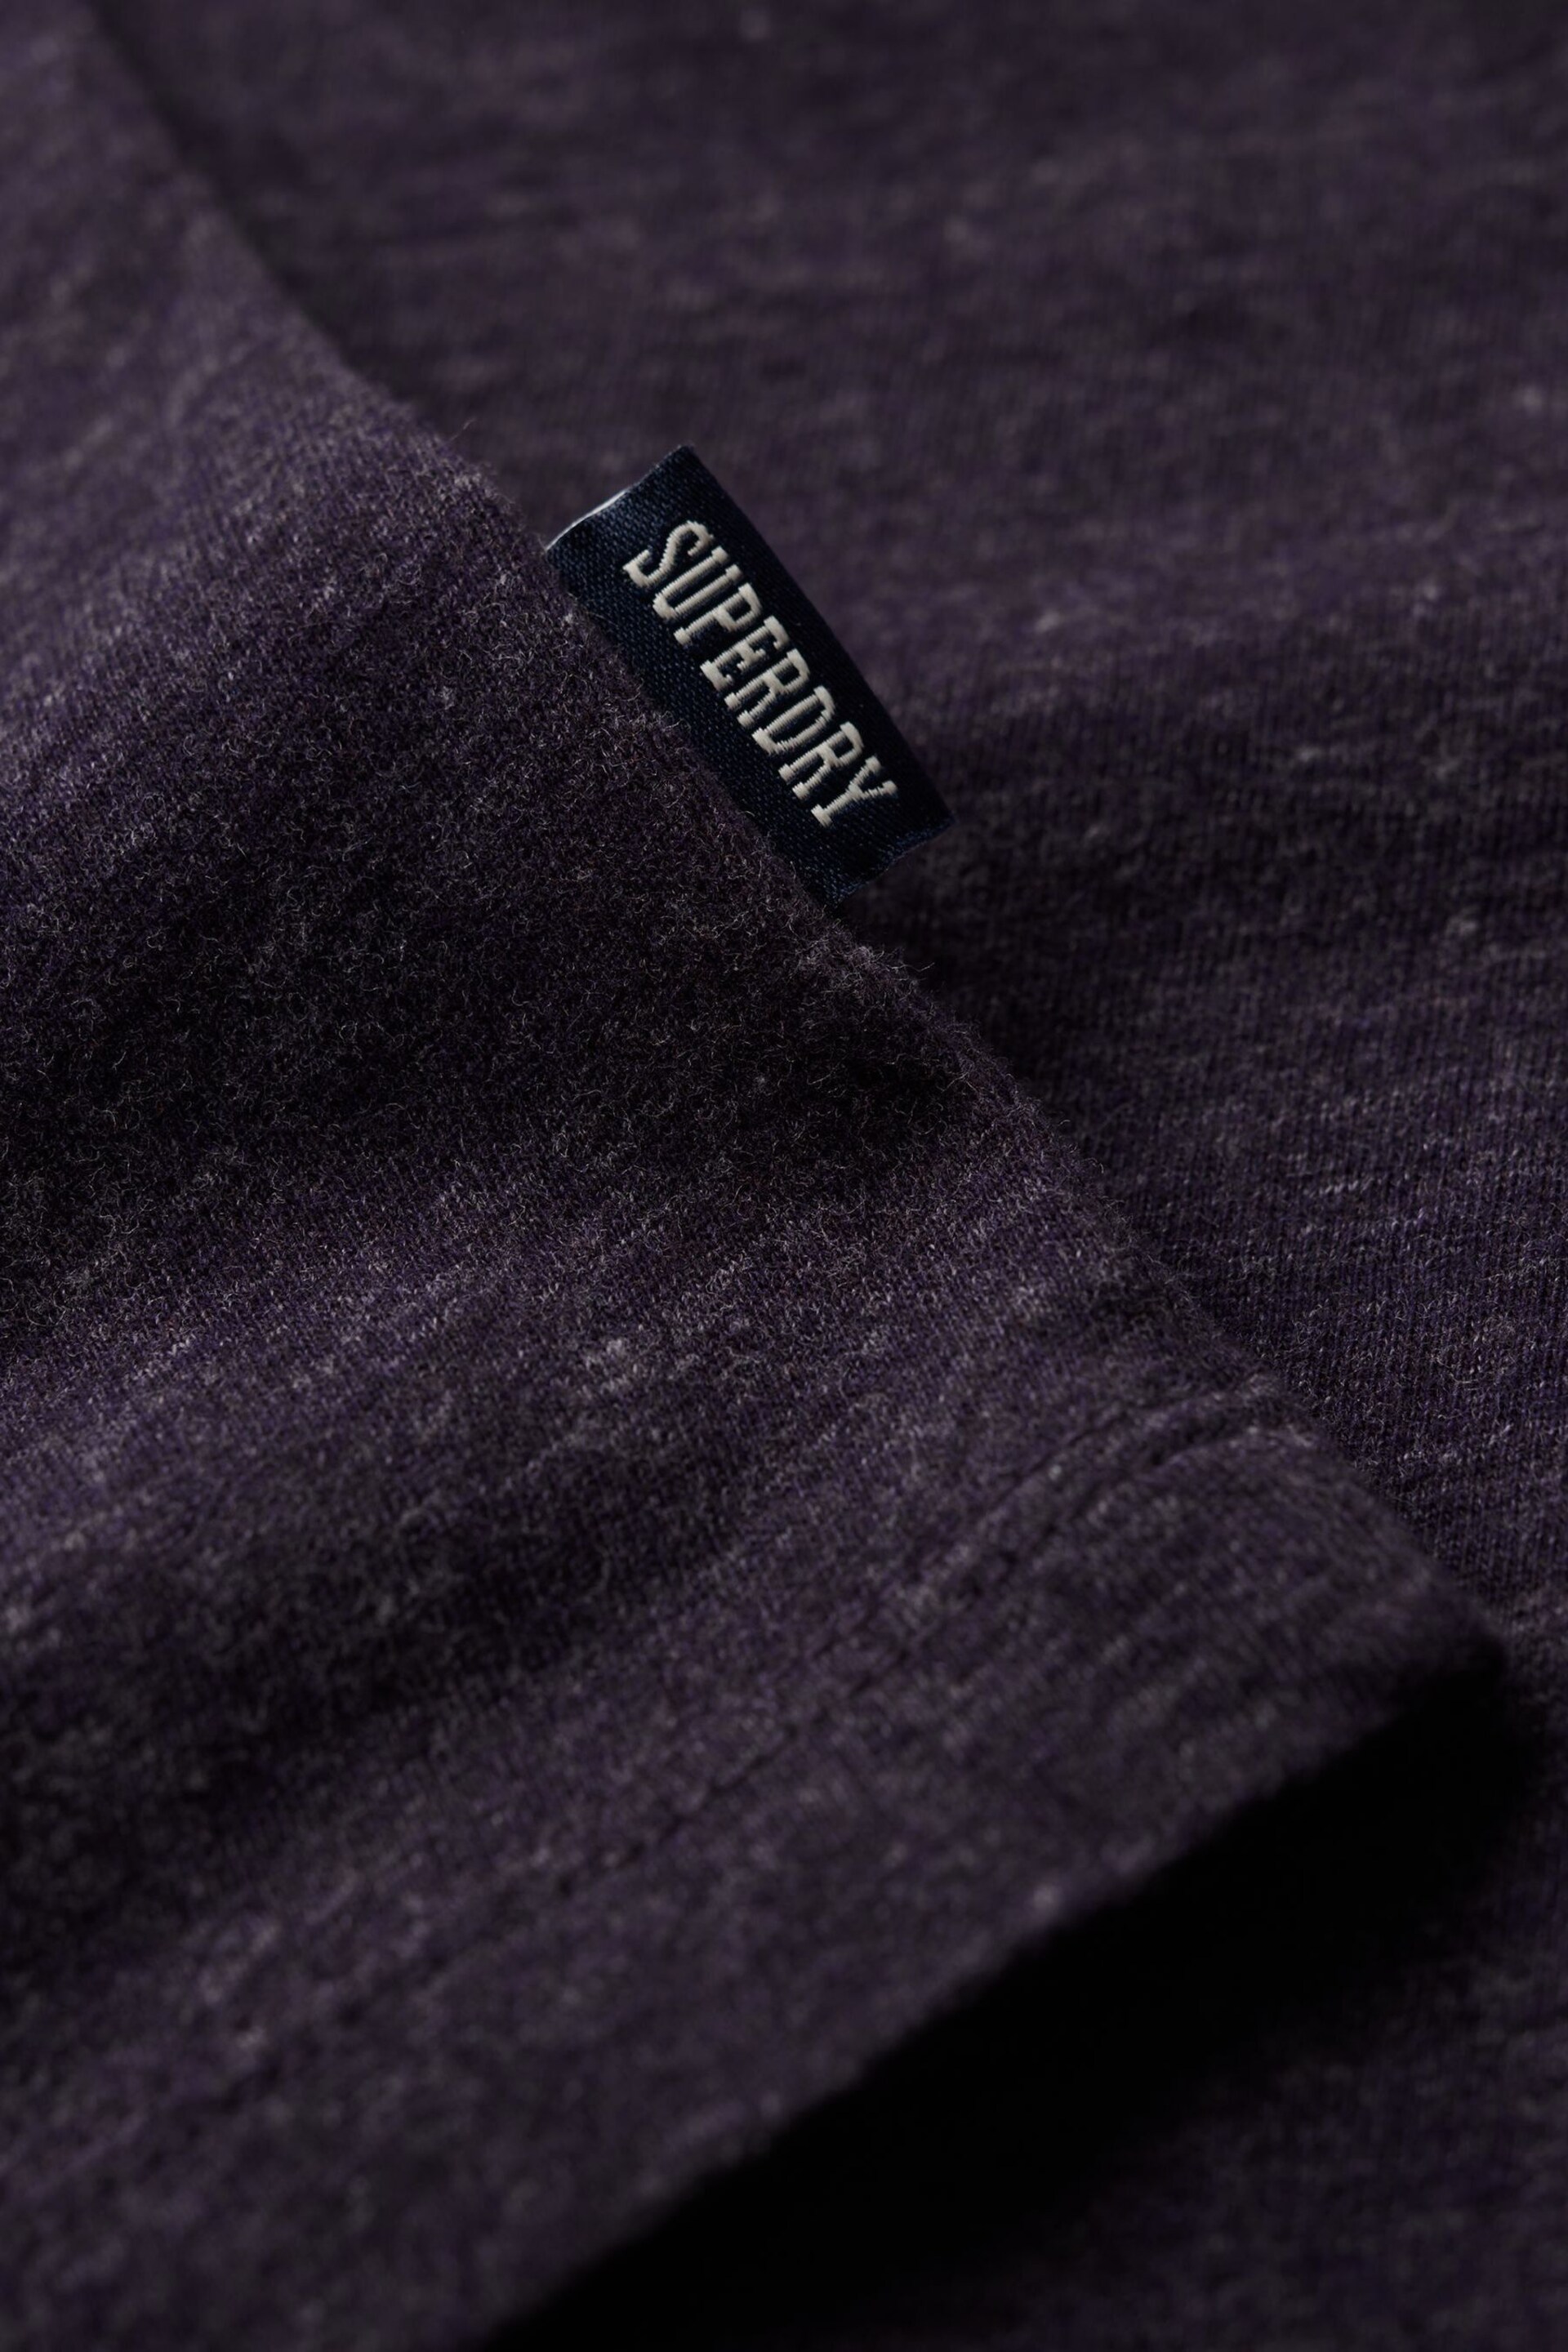 Superdry Purple Marl Vintage Logo Embroided T-Shirt - Image 5 of 6